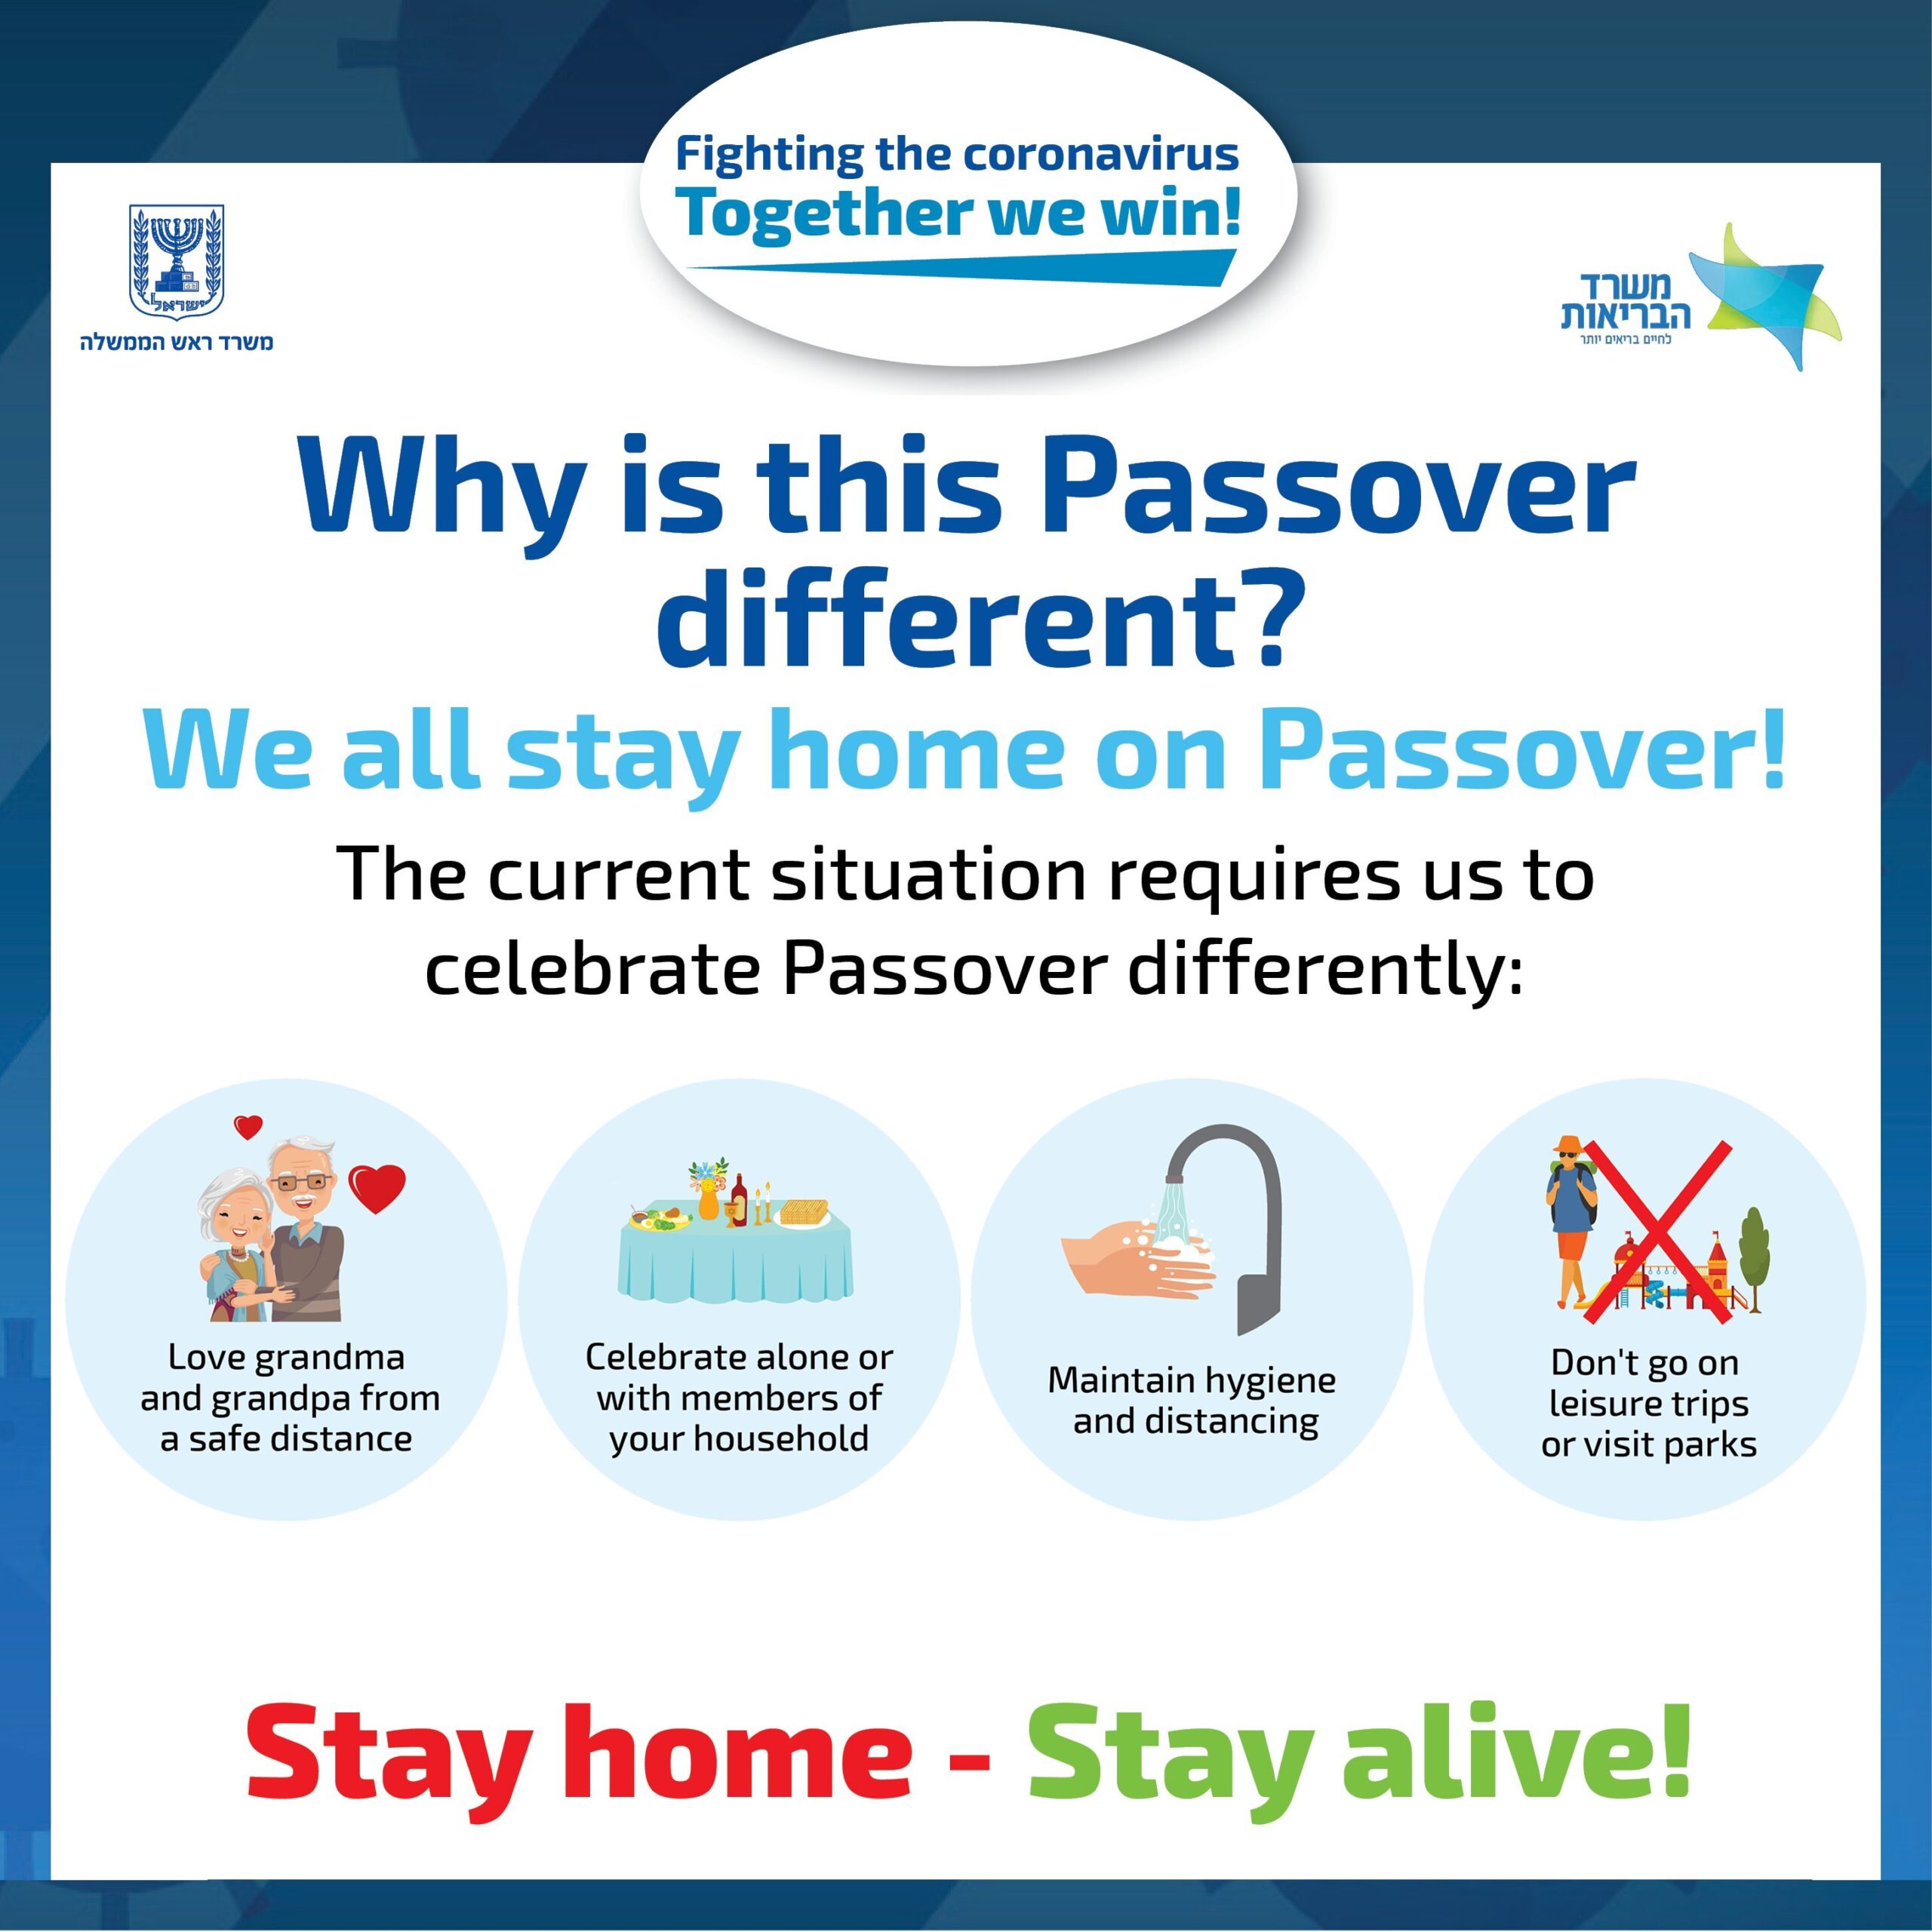 We all stay home on Passover